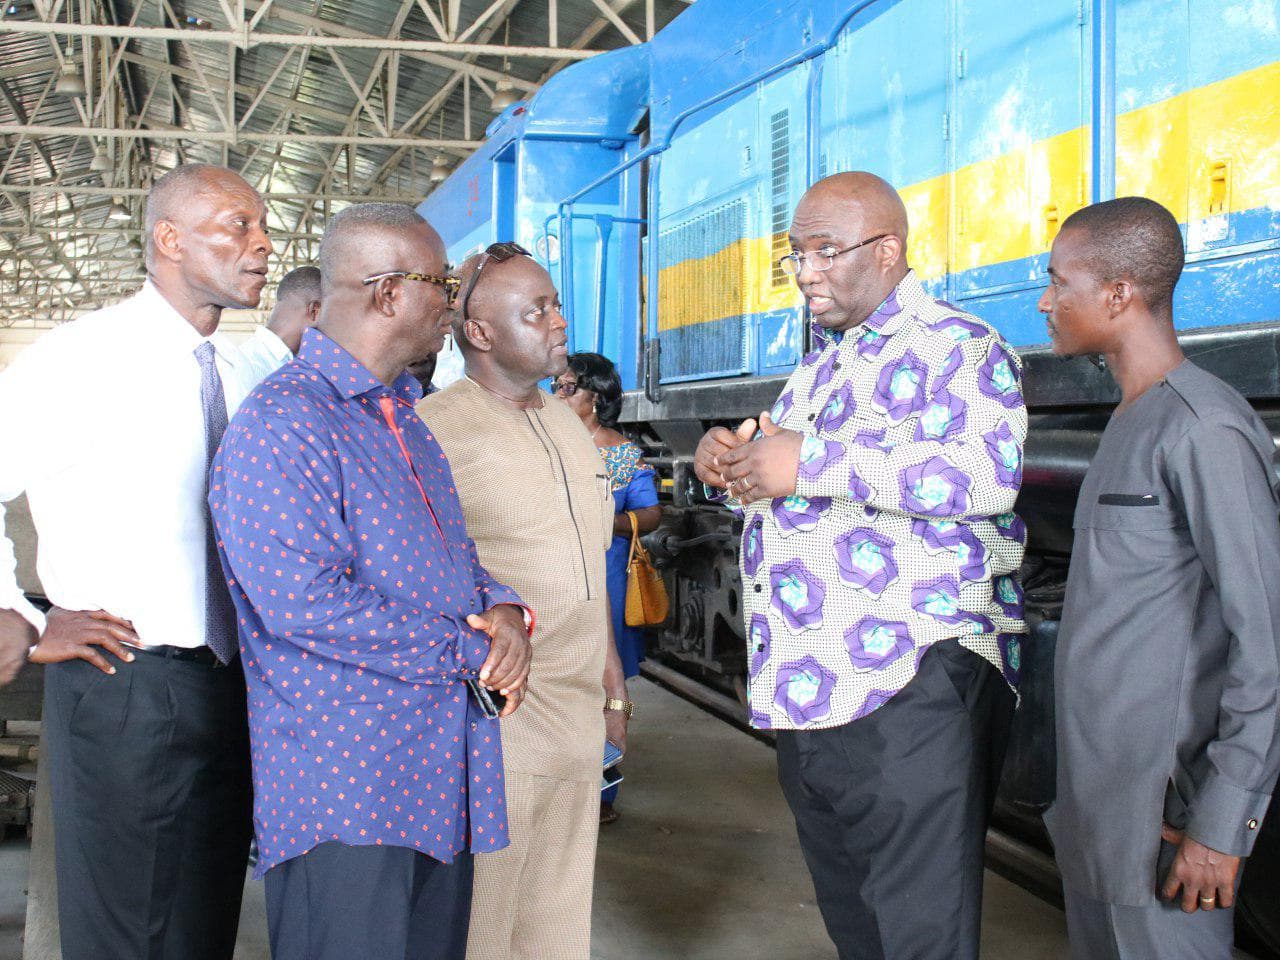 Mr Joe Ghartey (2nd right) in a discussion with Mr Yaw Owusu (in brown outfit) and some officials of the Ghana Railway Development Authority during a tour of the railway workshop at the Tema Port.